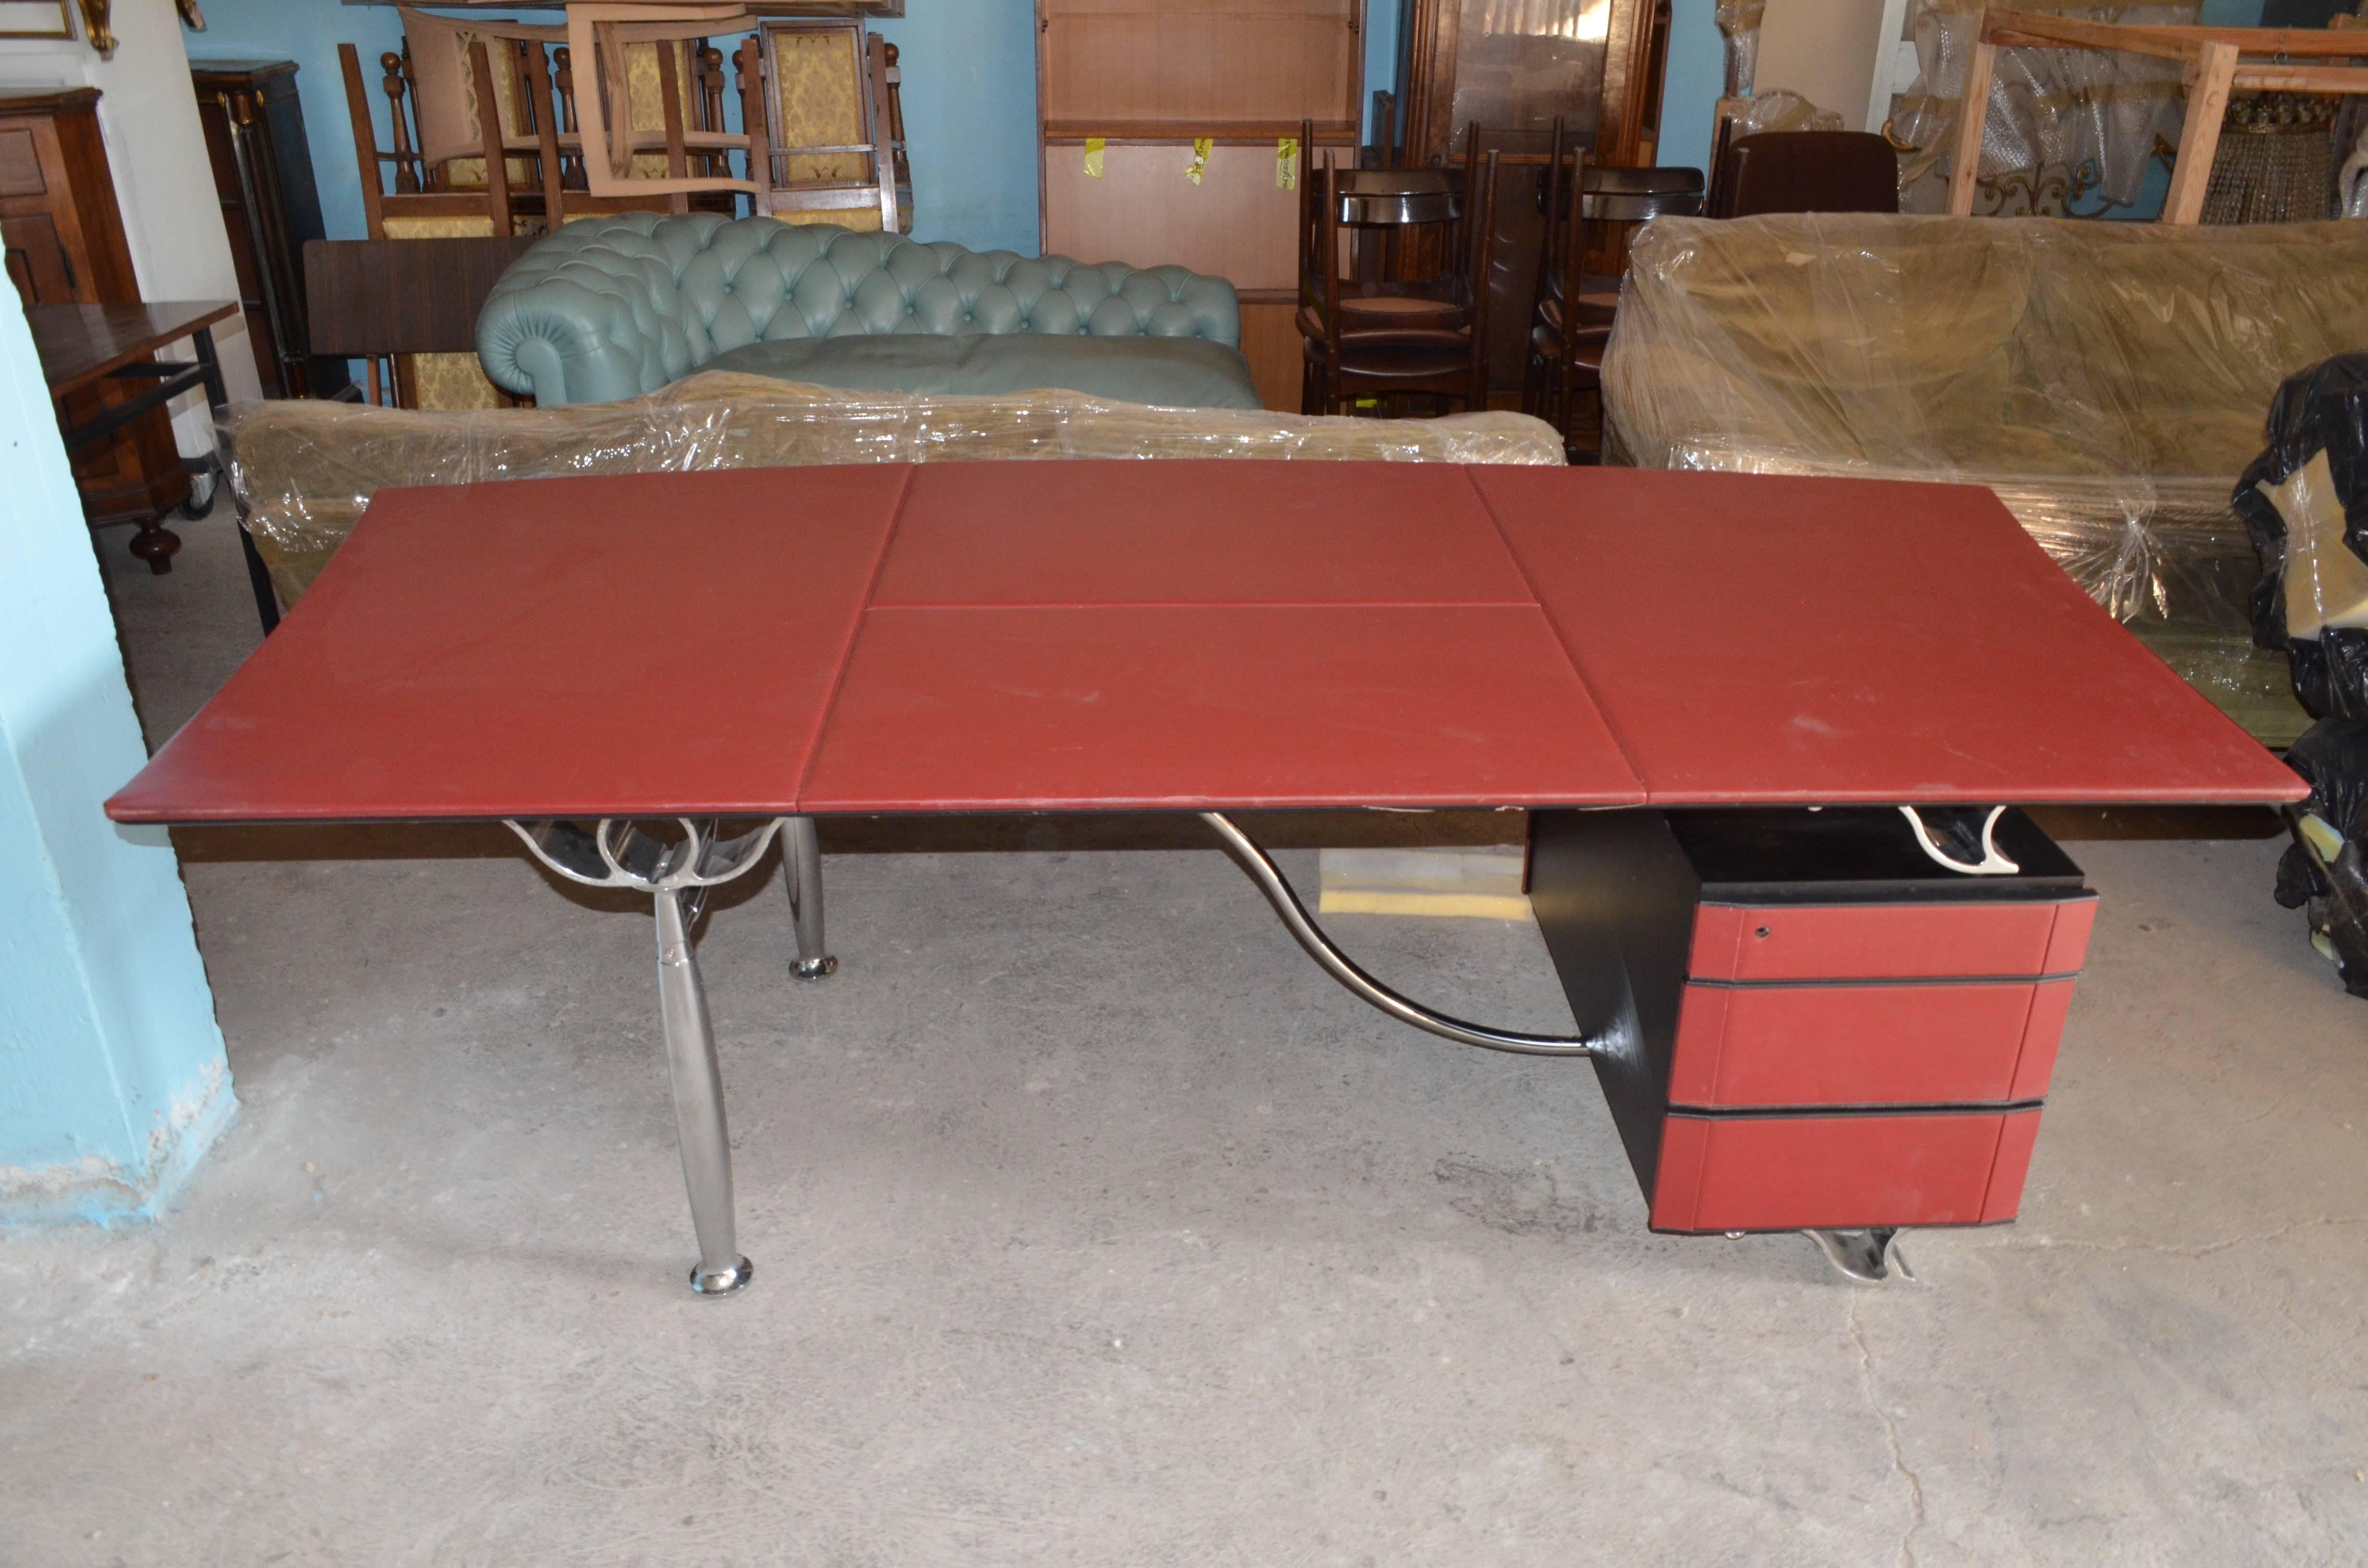 This desk has been designed in 1997 by Italian designer Luca Scacchetti and produced by Poltrona Frau. The red parts are in red leather while the structure is made in chromed steel worked as classical Corinthian capital. On the right side there are